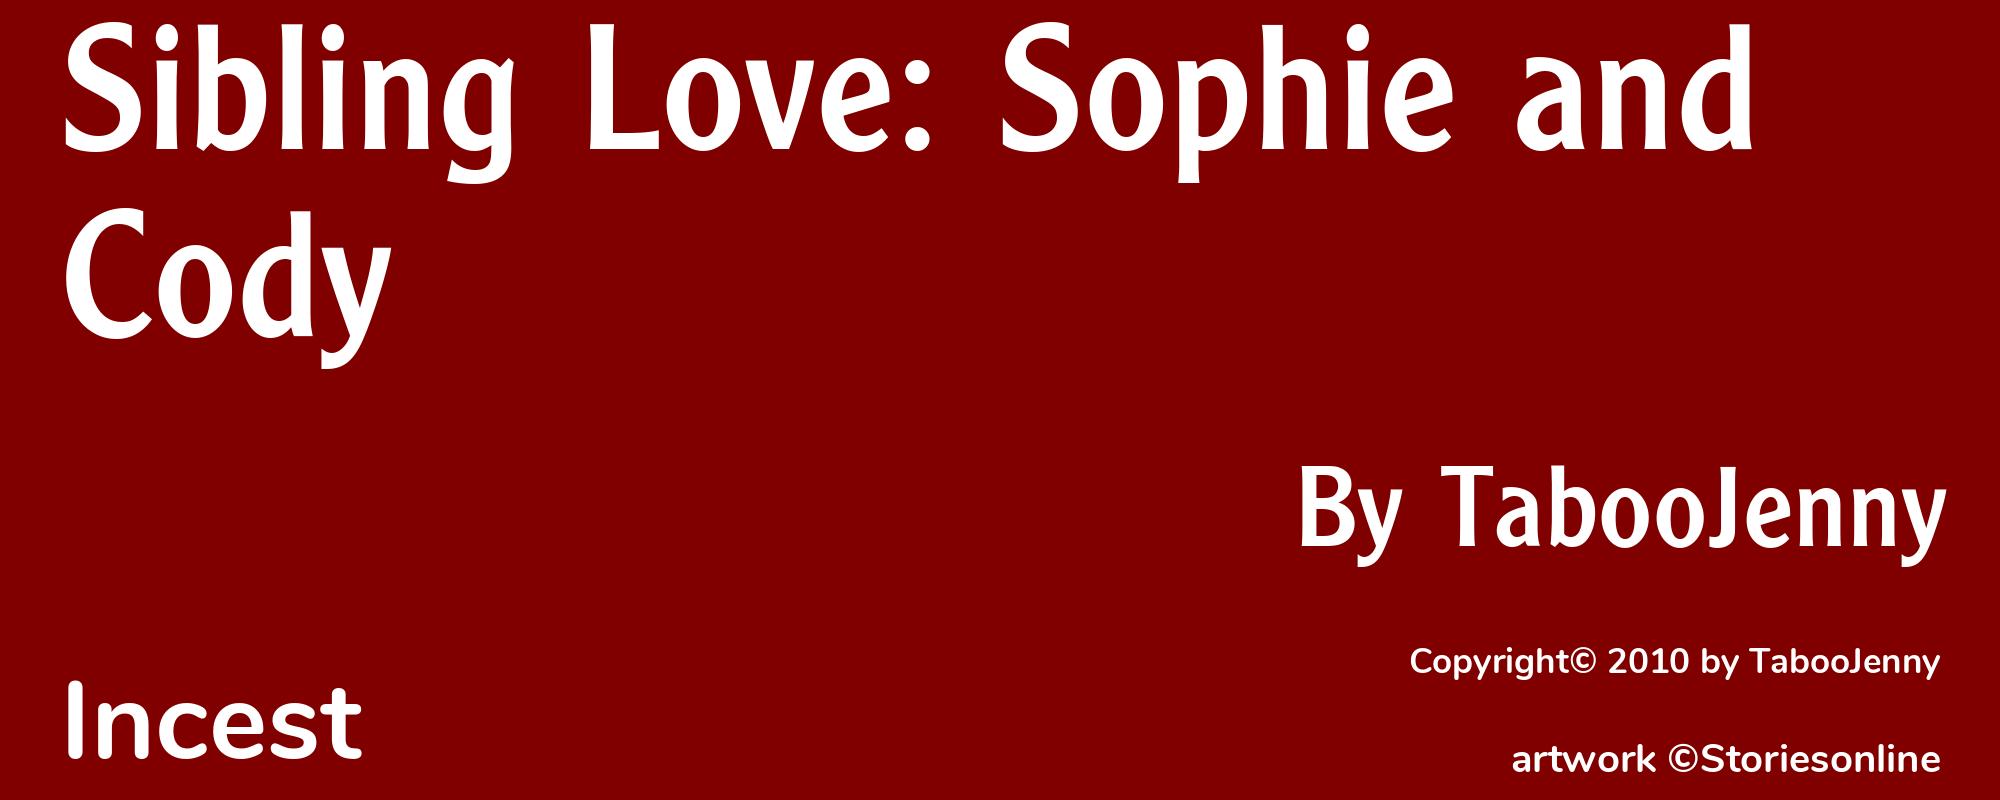 Sibling Love: Sophie and Cody - Cover